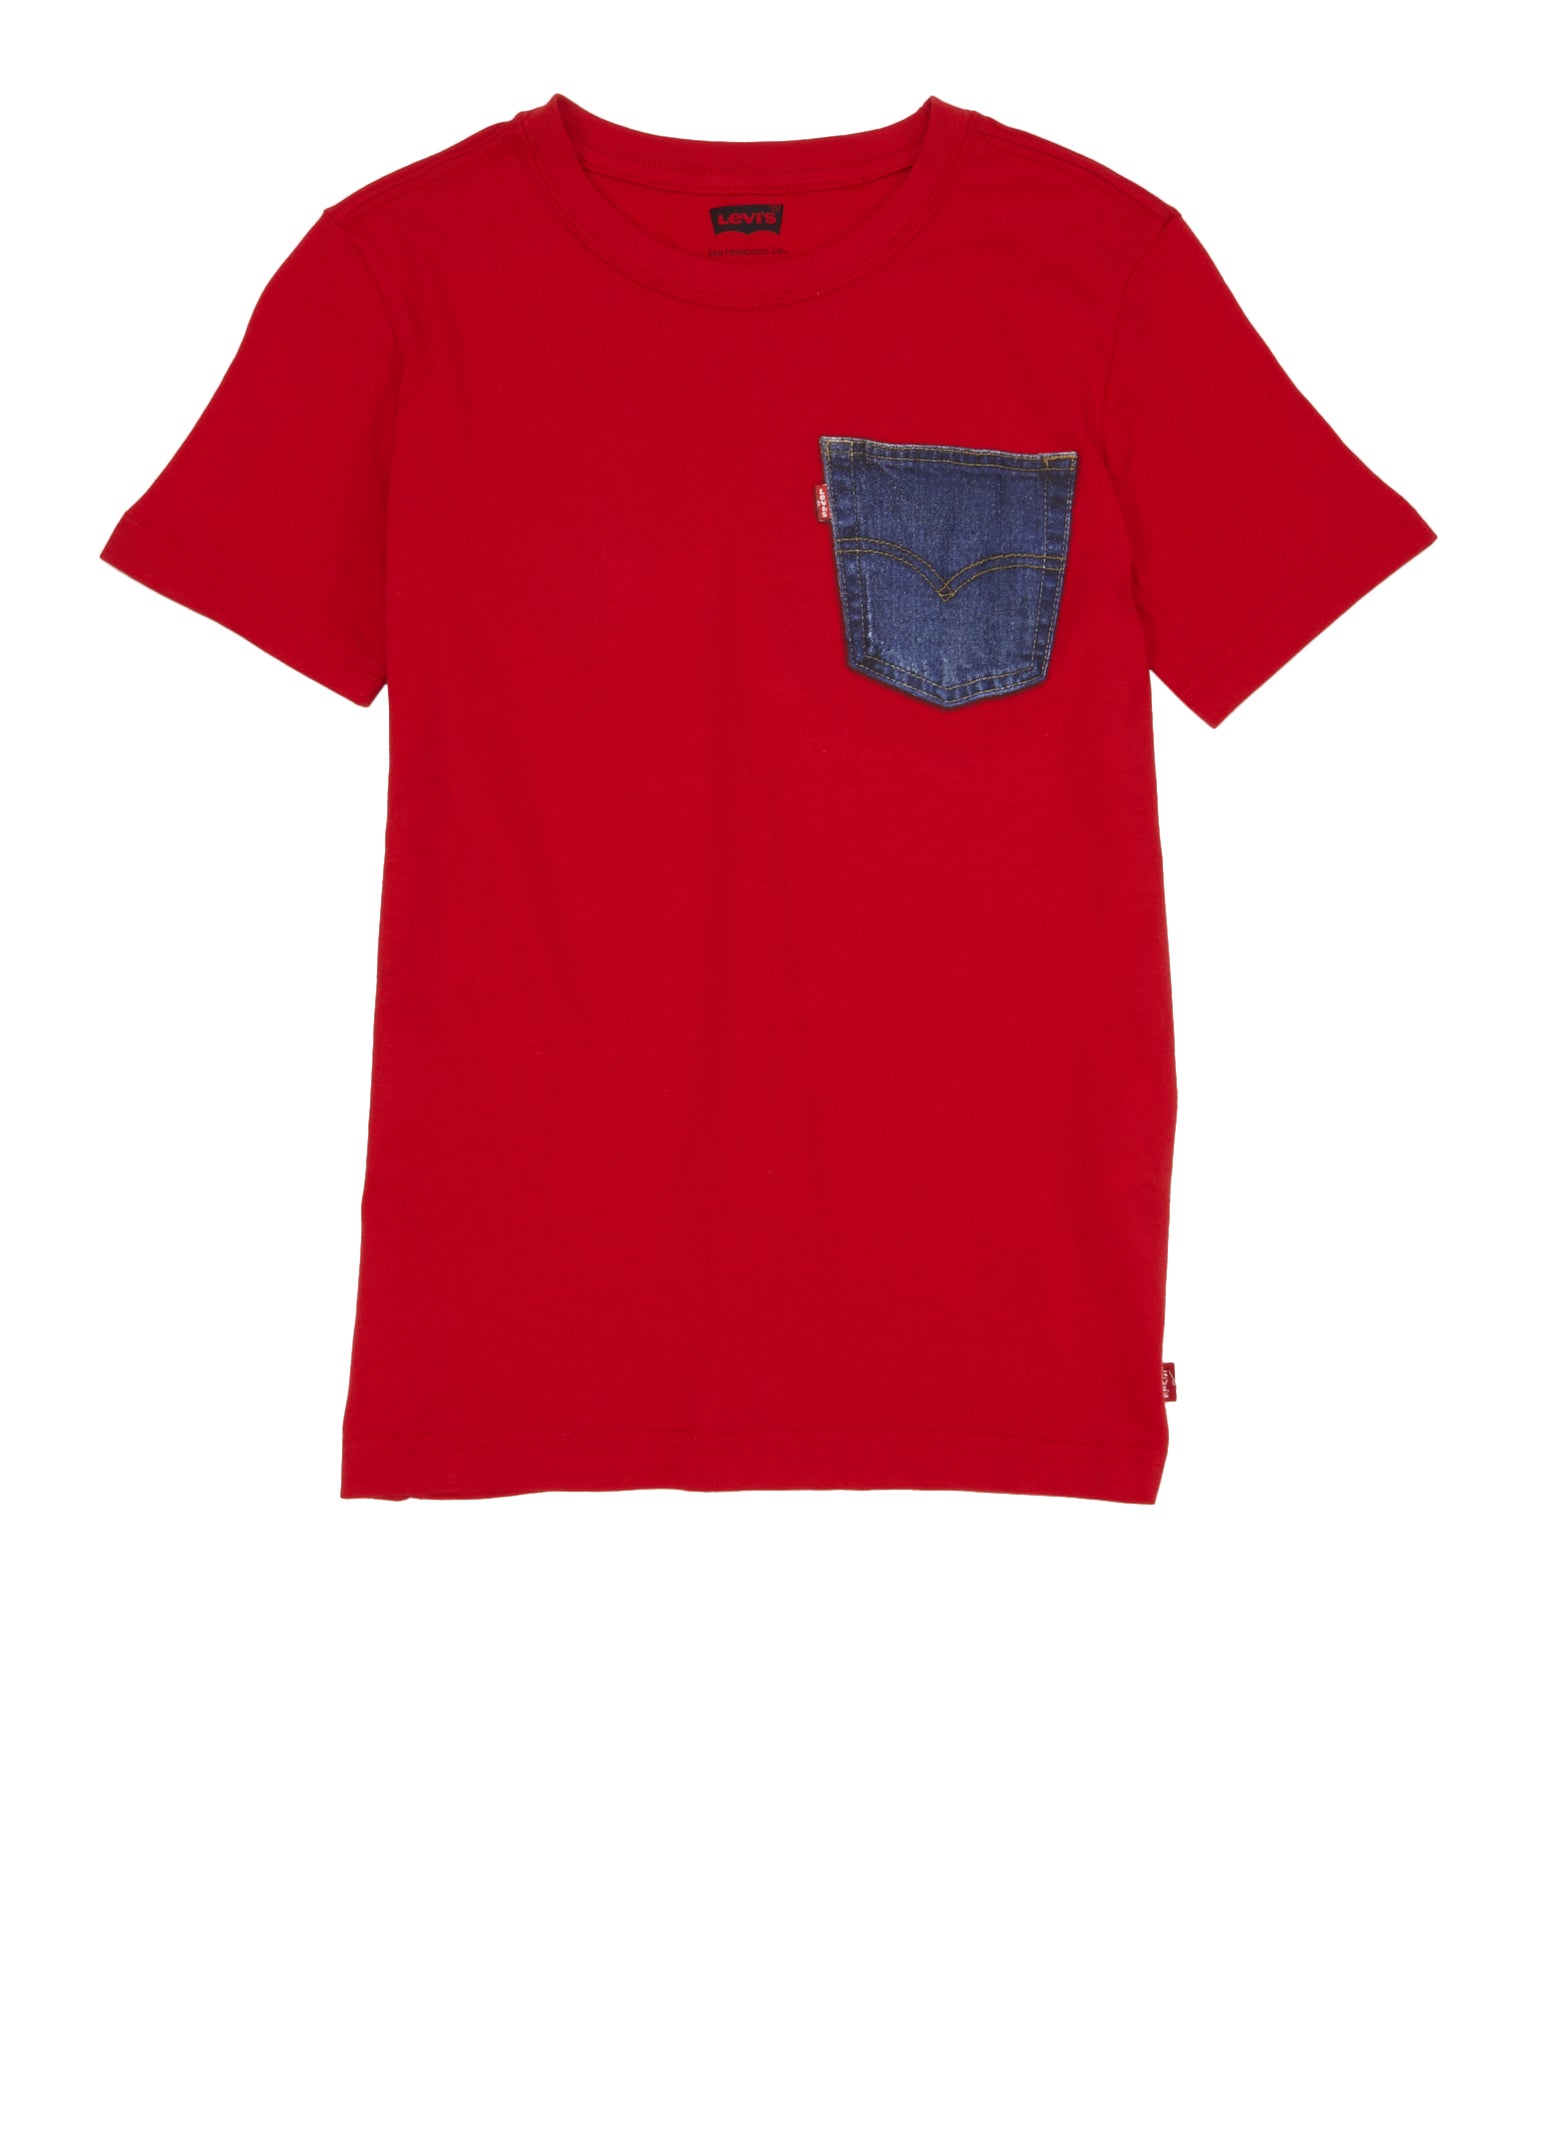 Boys Levis Pocket Detail Graphic Tee, Red, Size XL